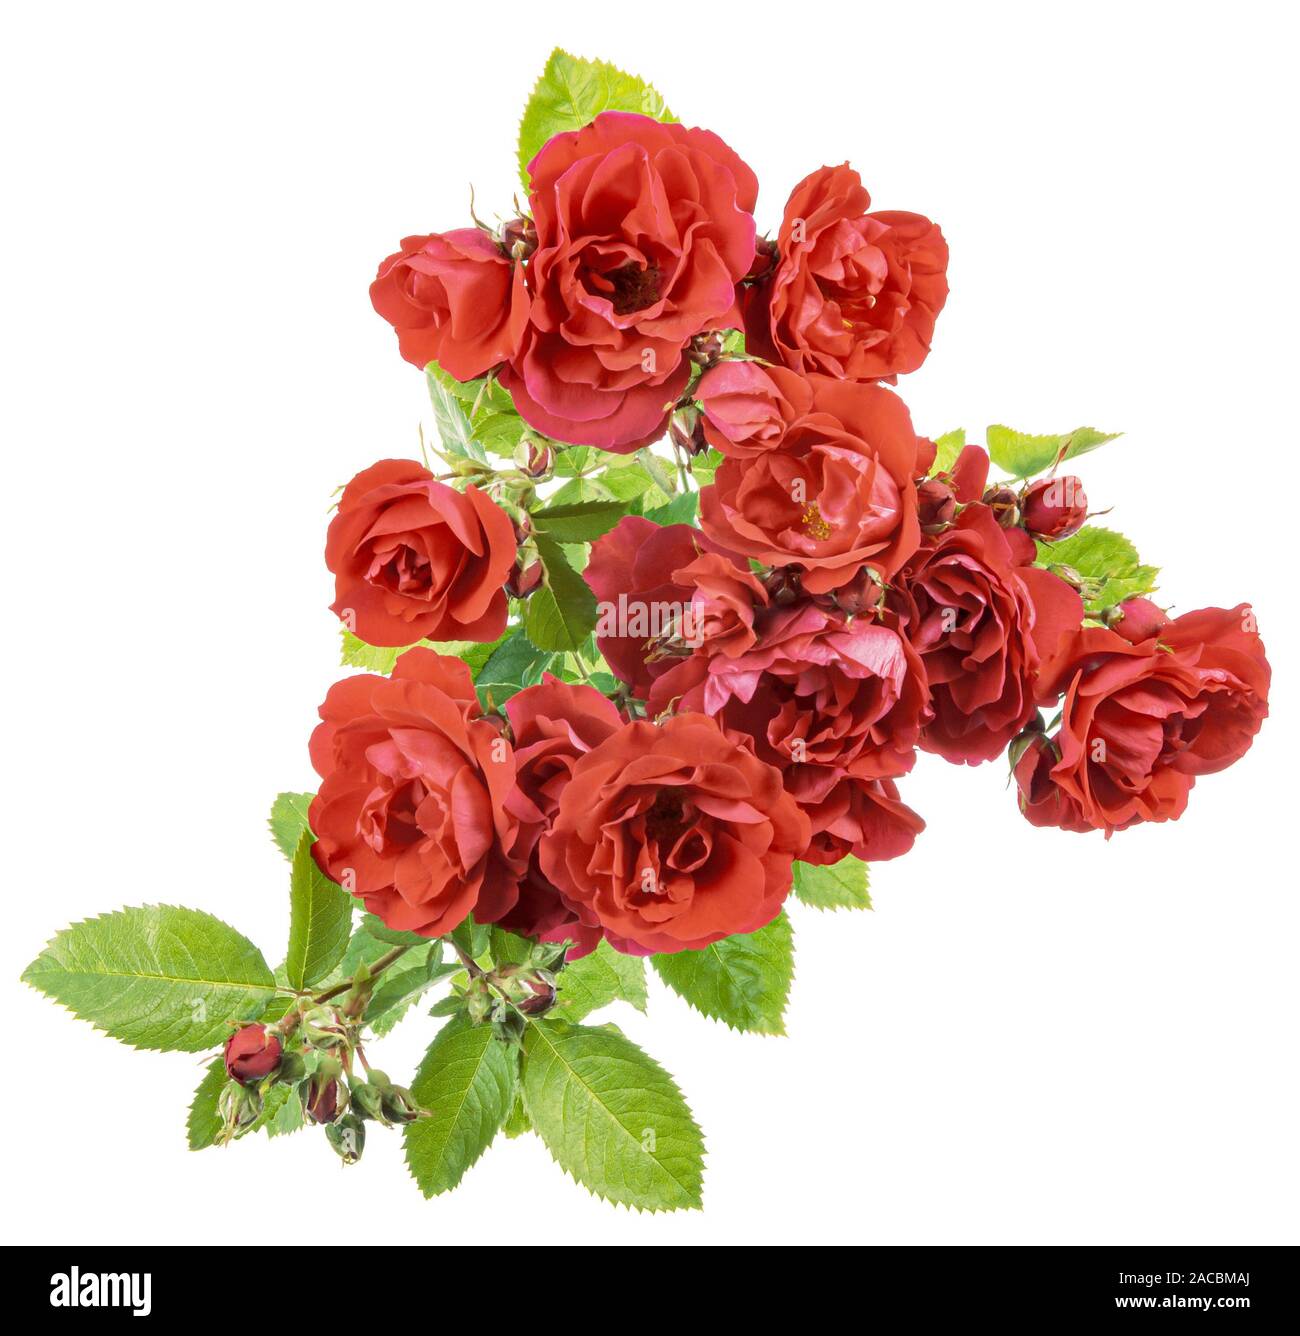 Rose flowers isolated over white background. Square composition Stock ...